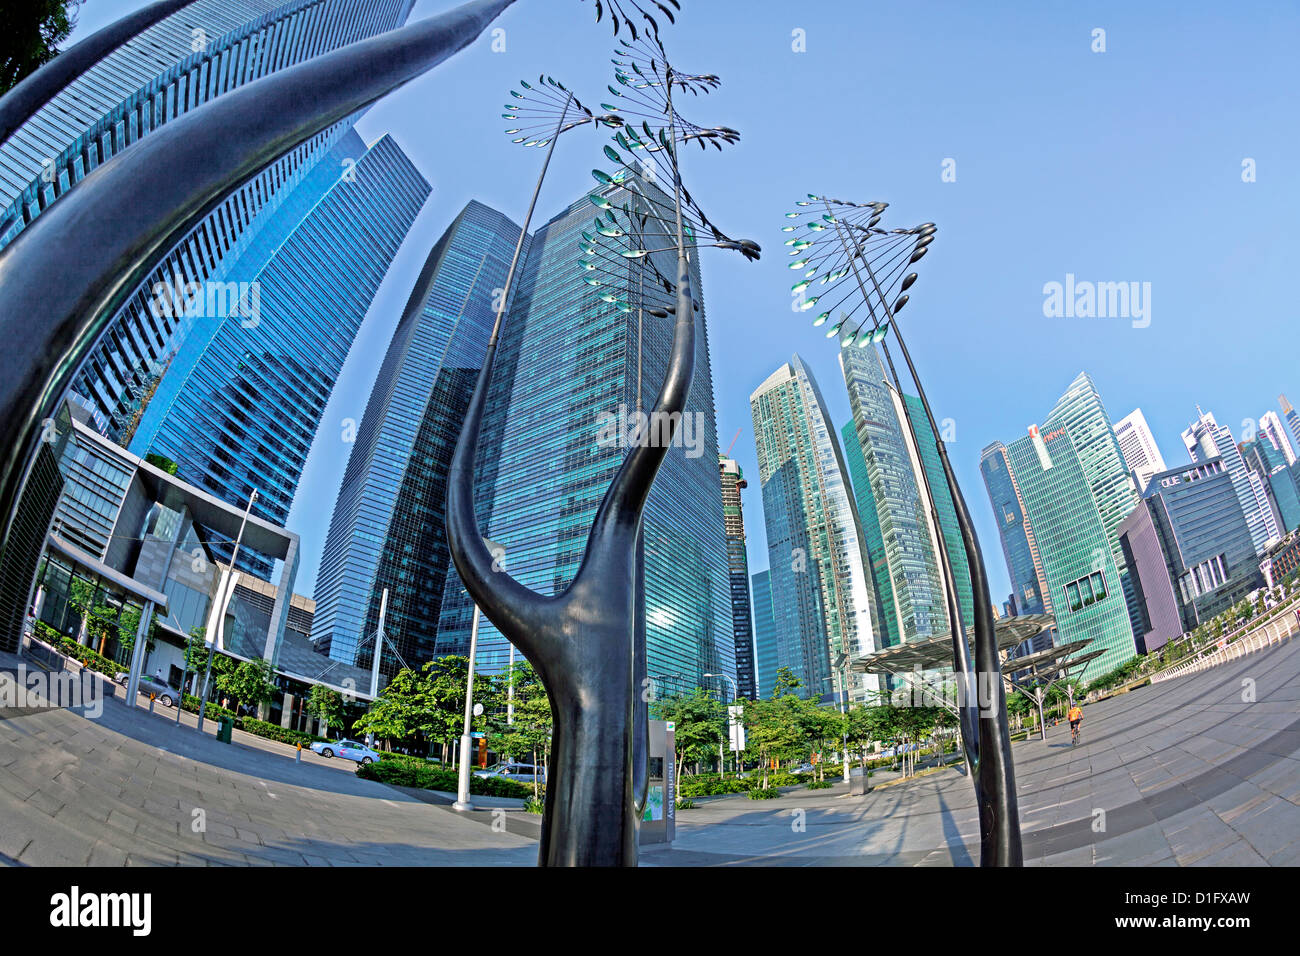 Skyscrapers of the Financial Centre and modern sculptures, Singapore, Southeast Asia, Asia Stock Photo